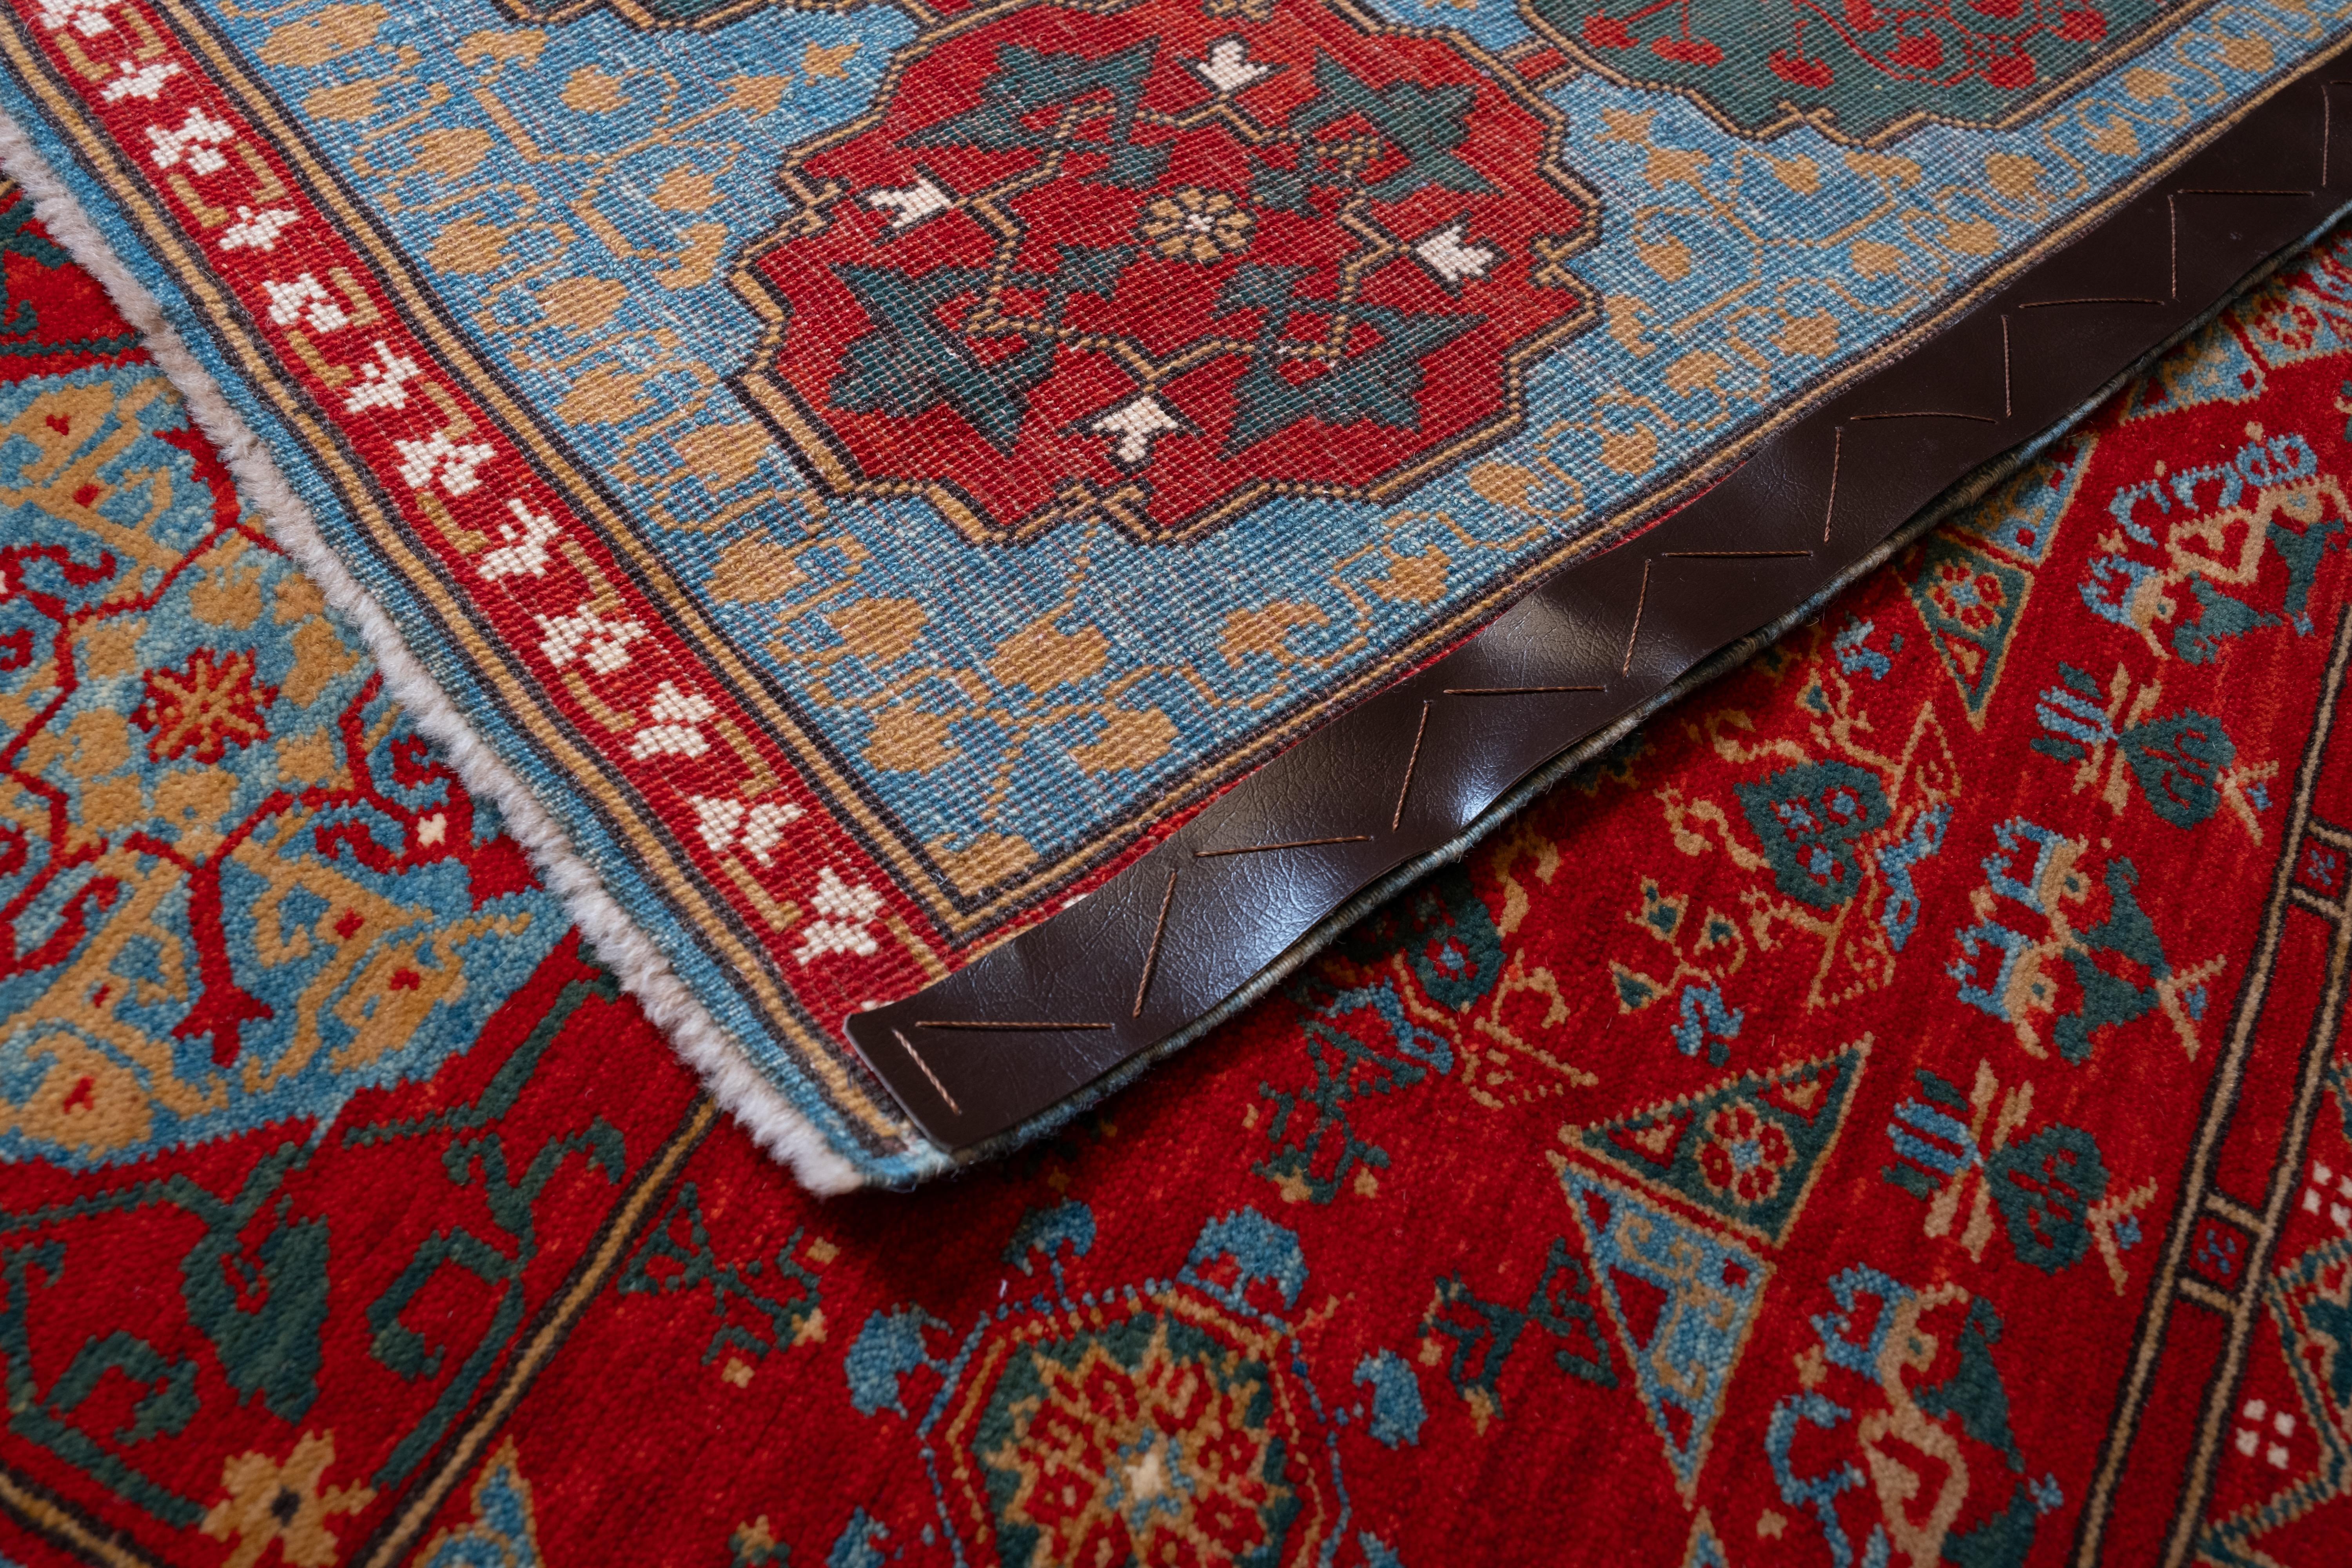 Hand-Knotted Ararat Rugs The Simonetti Mamluk Carpet 16th C. Revival Rug, Square Natural Dyed For Sale